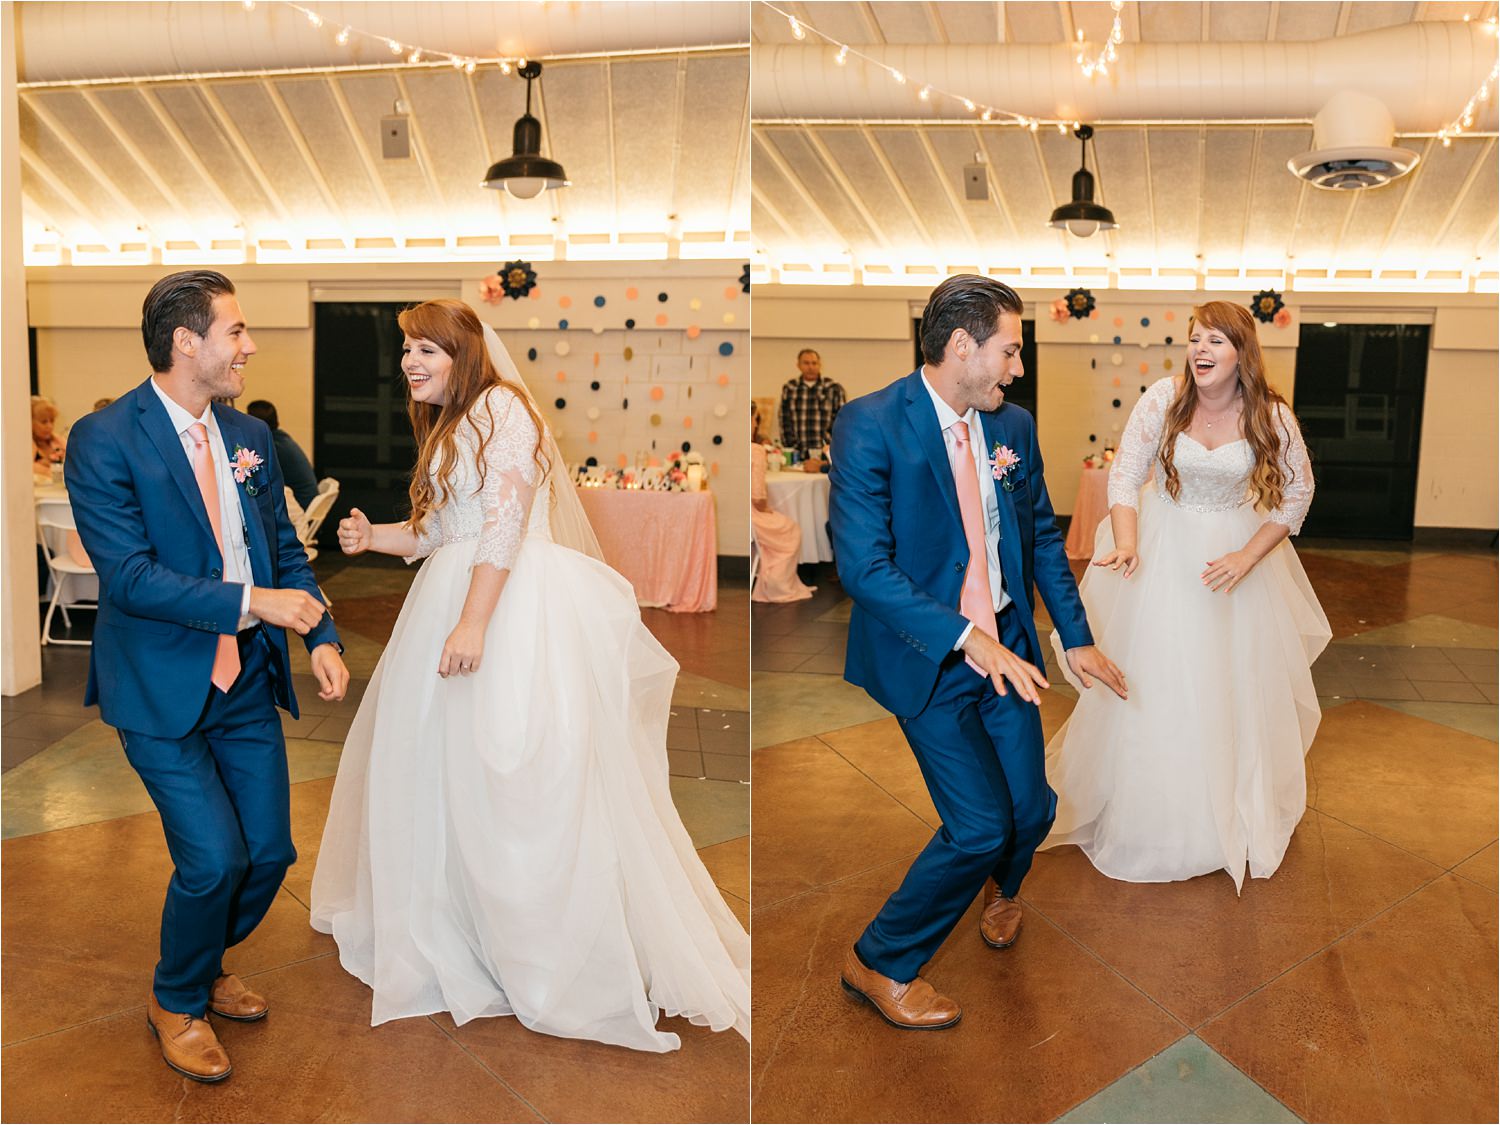 Dancing at the Wedding Reception - https://brittneyhannonphotography.com